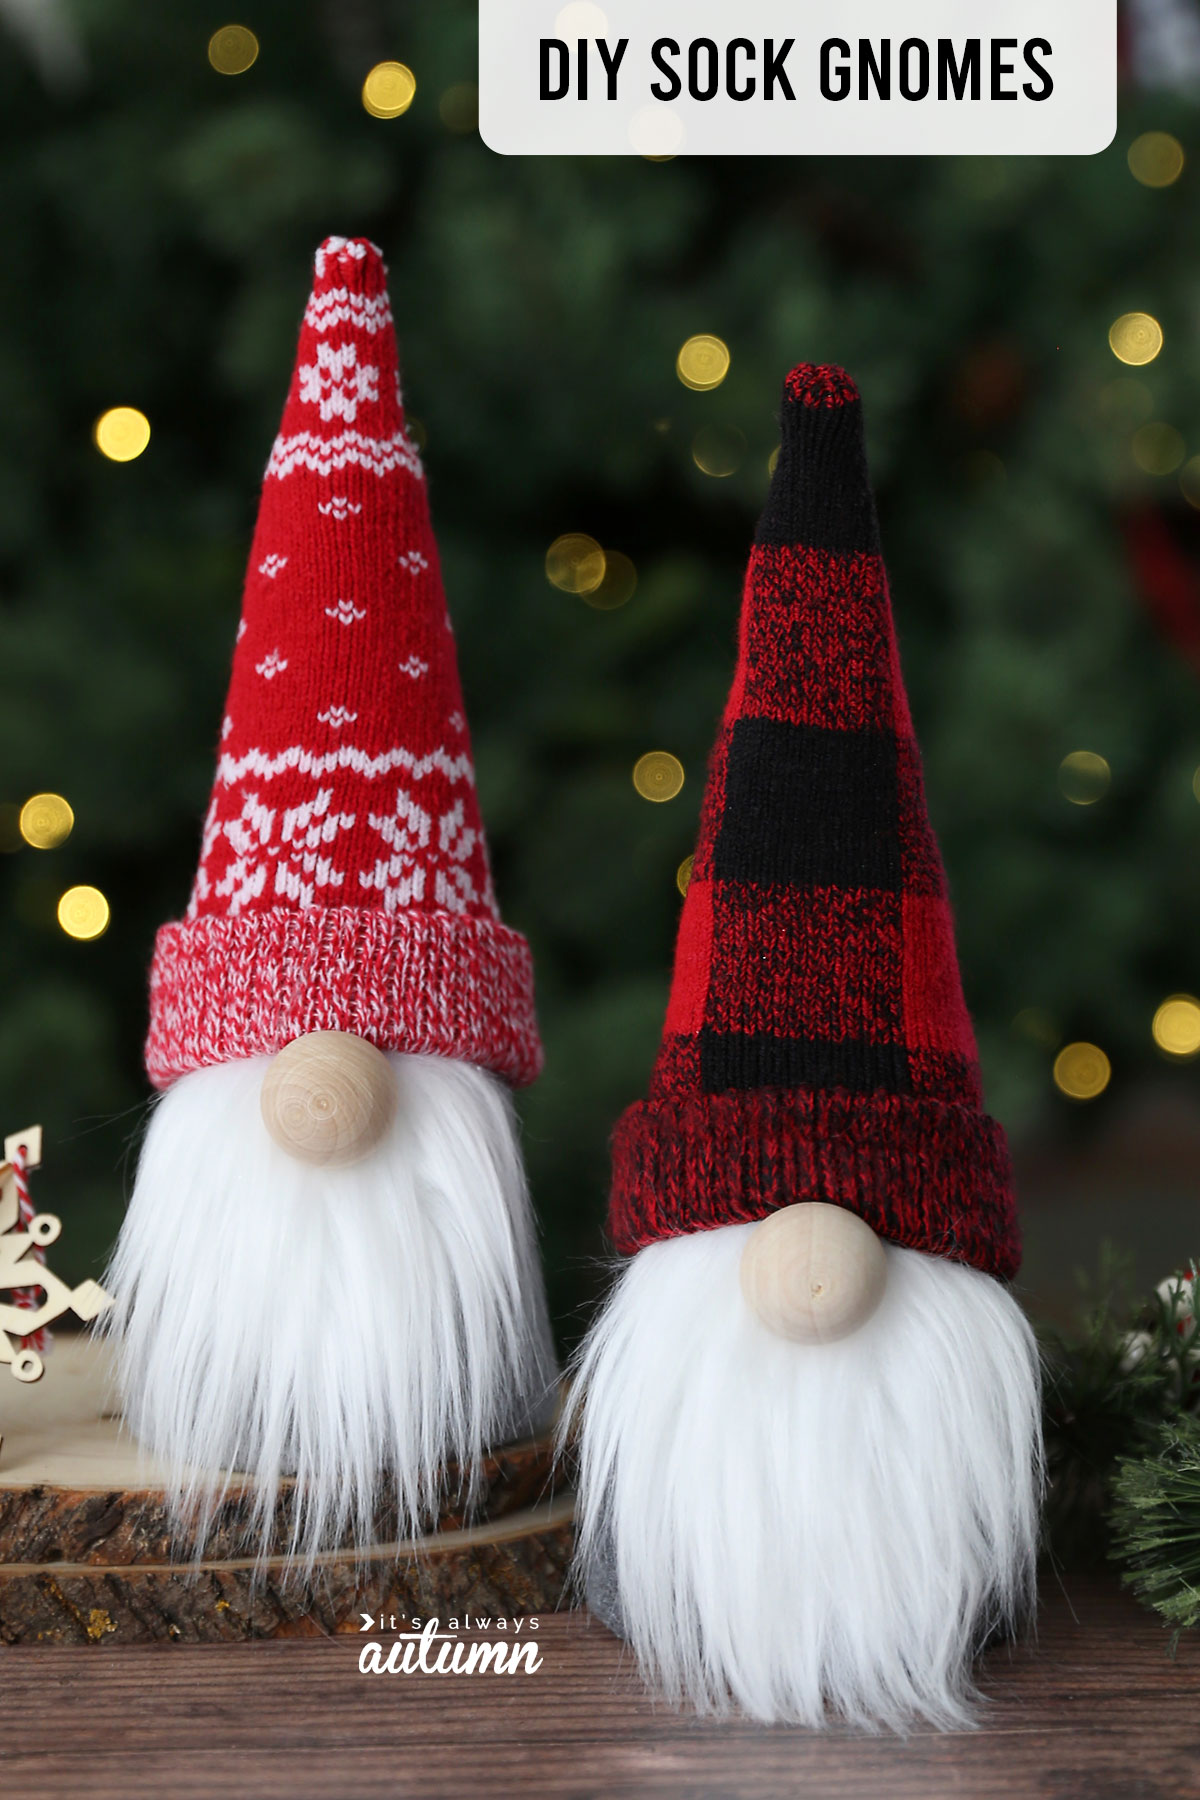 DIY sock gnomes made with cute red, white, and black patterned Christmas socks